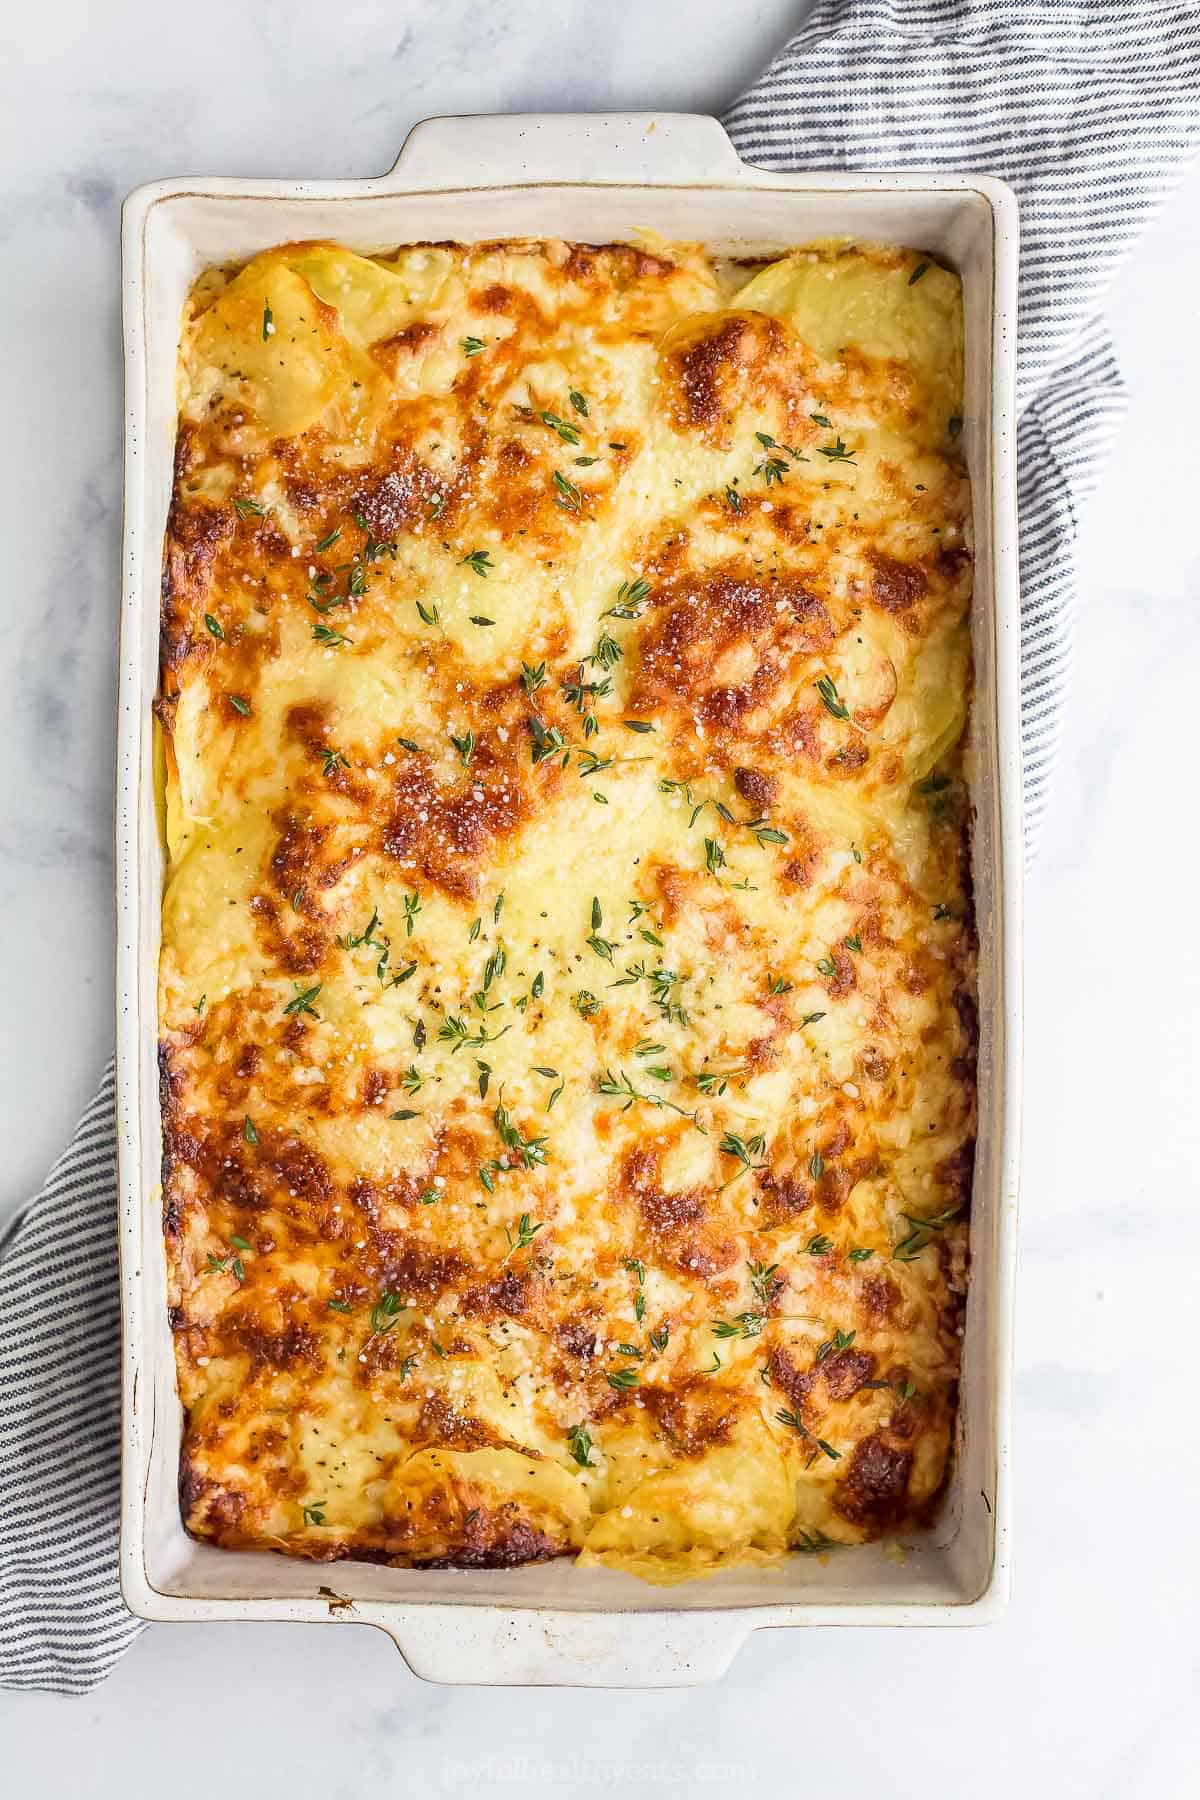 finished cheesy scalloped potatoes in a baking dish